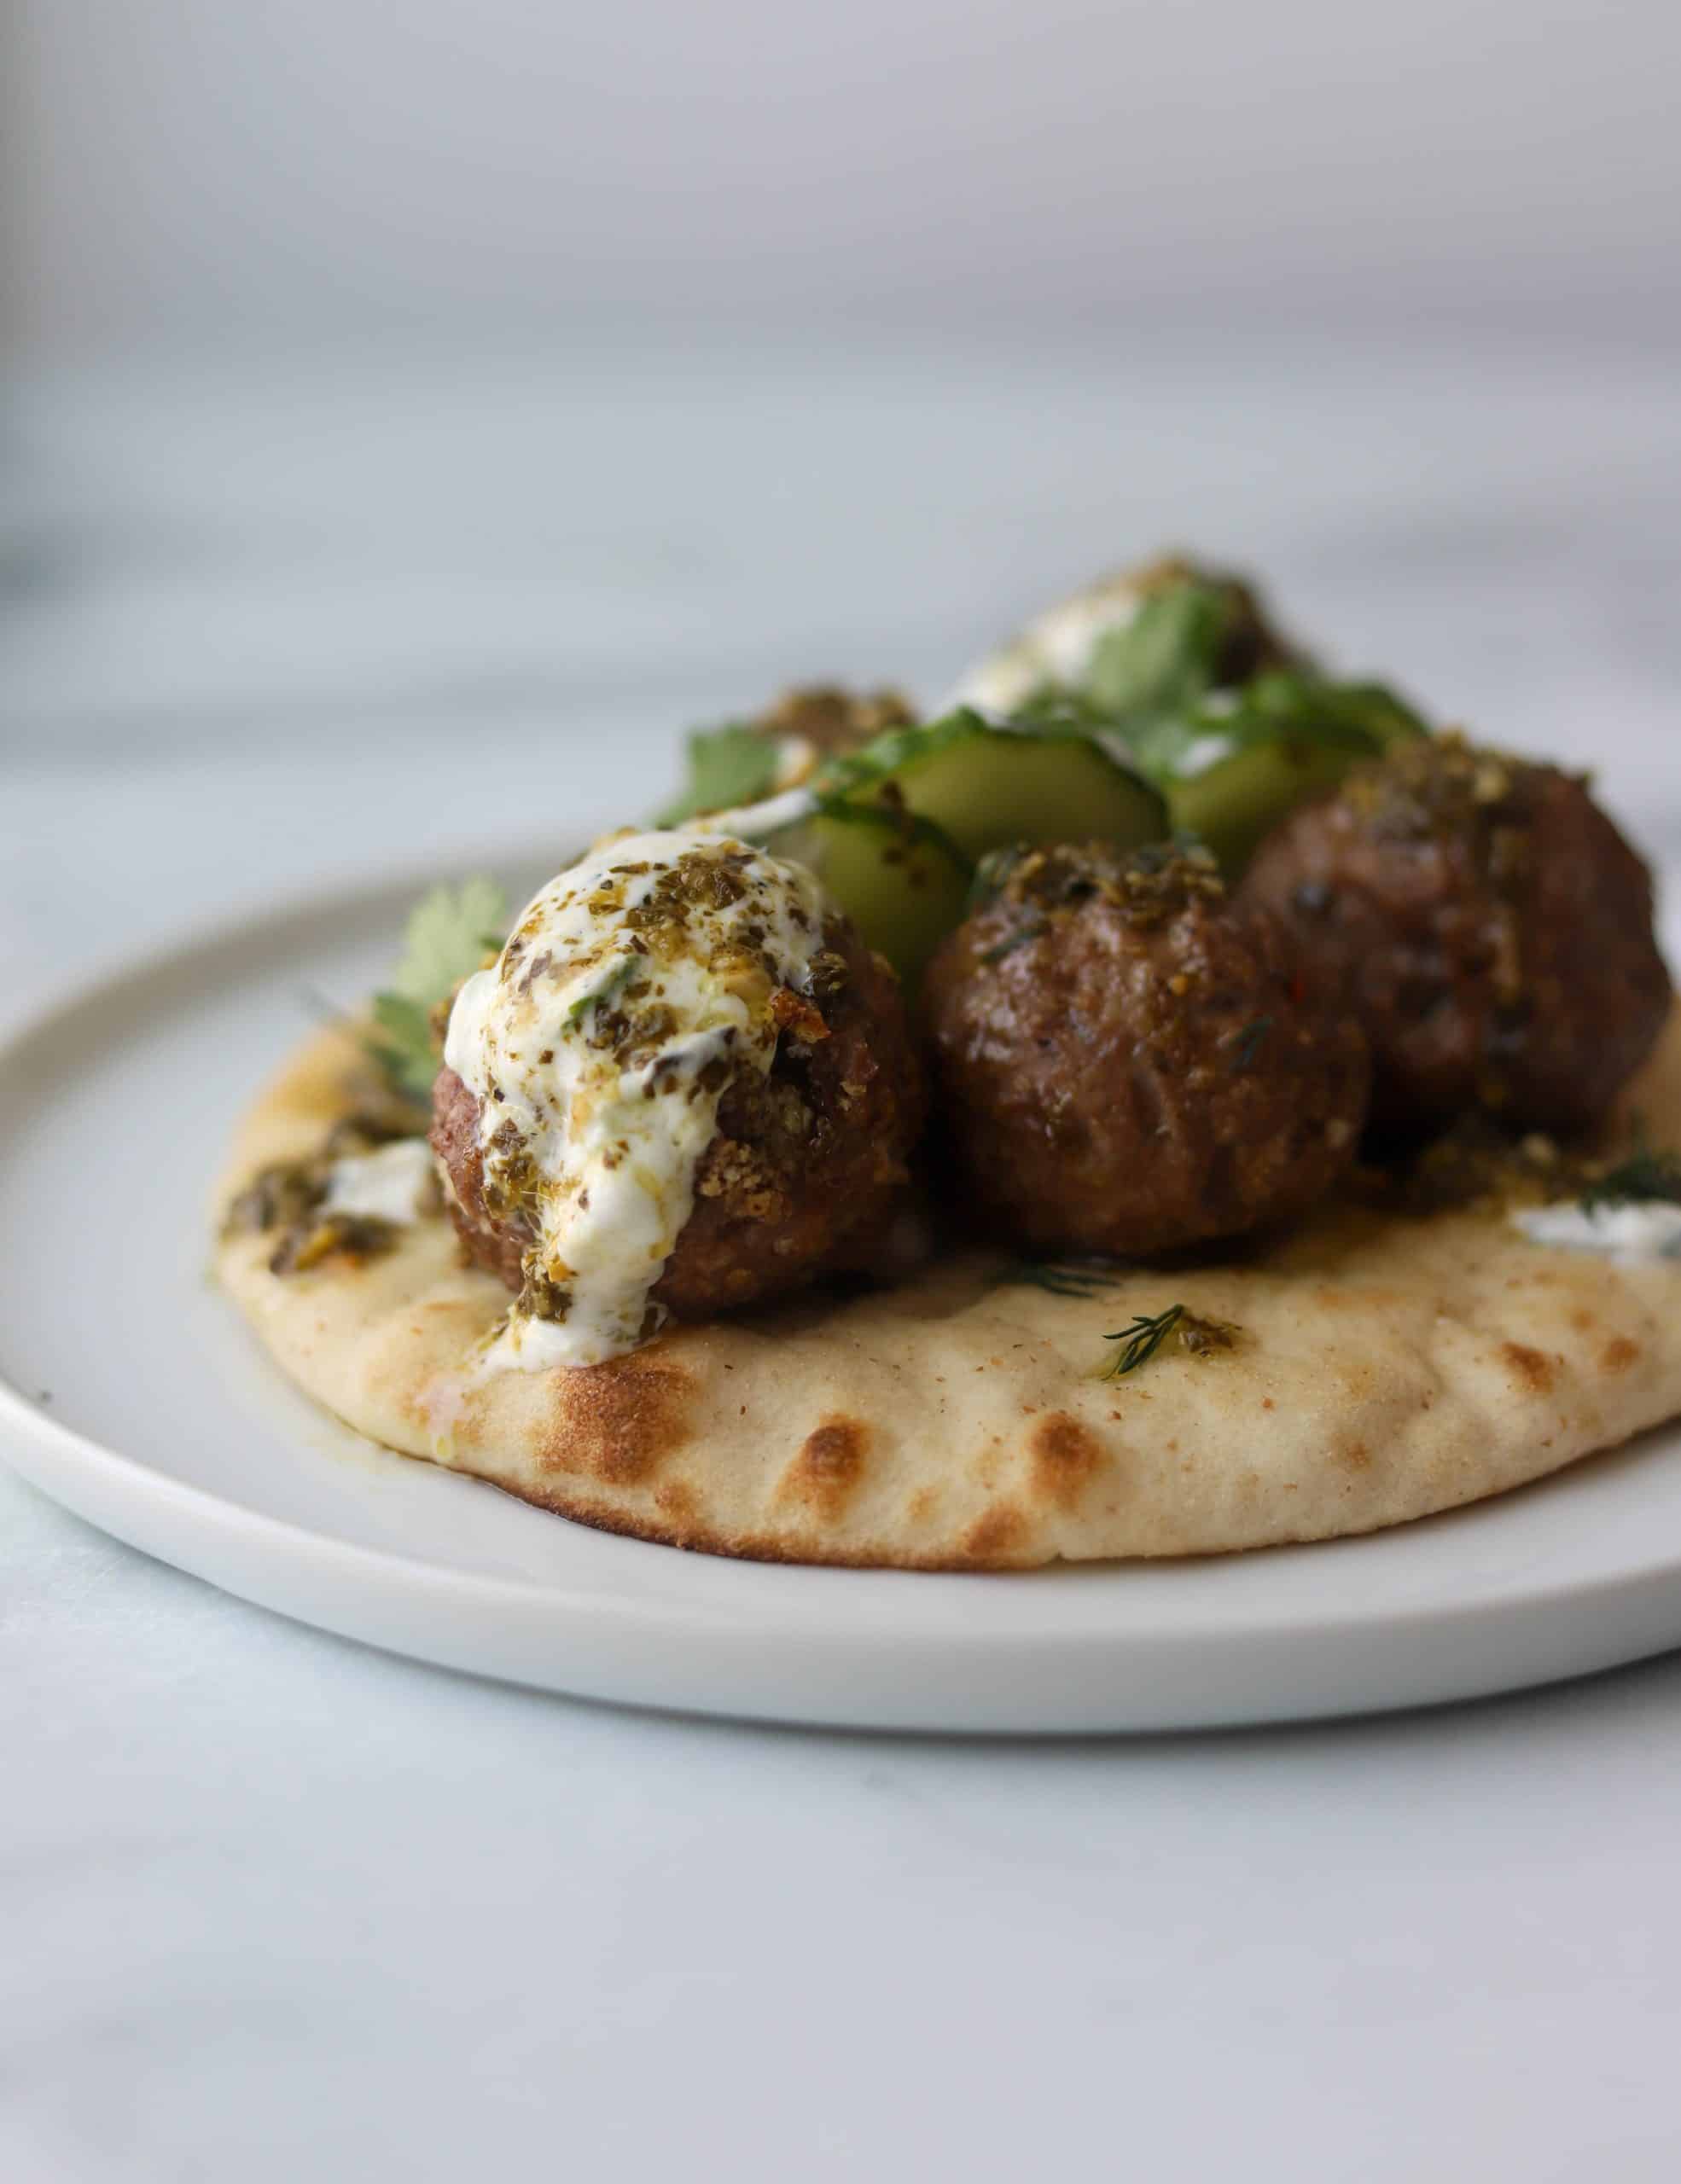 A side view of meatballs topped with tzatziki sauce, pesto, and cucumbers on top of a pita.